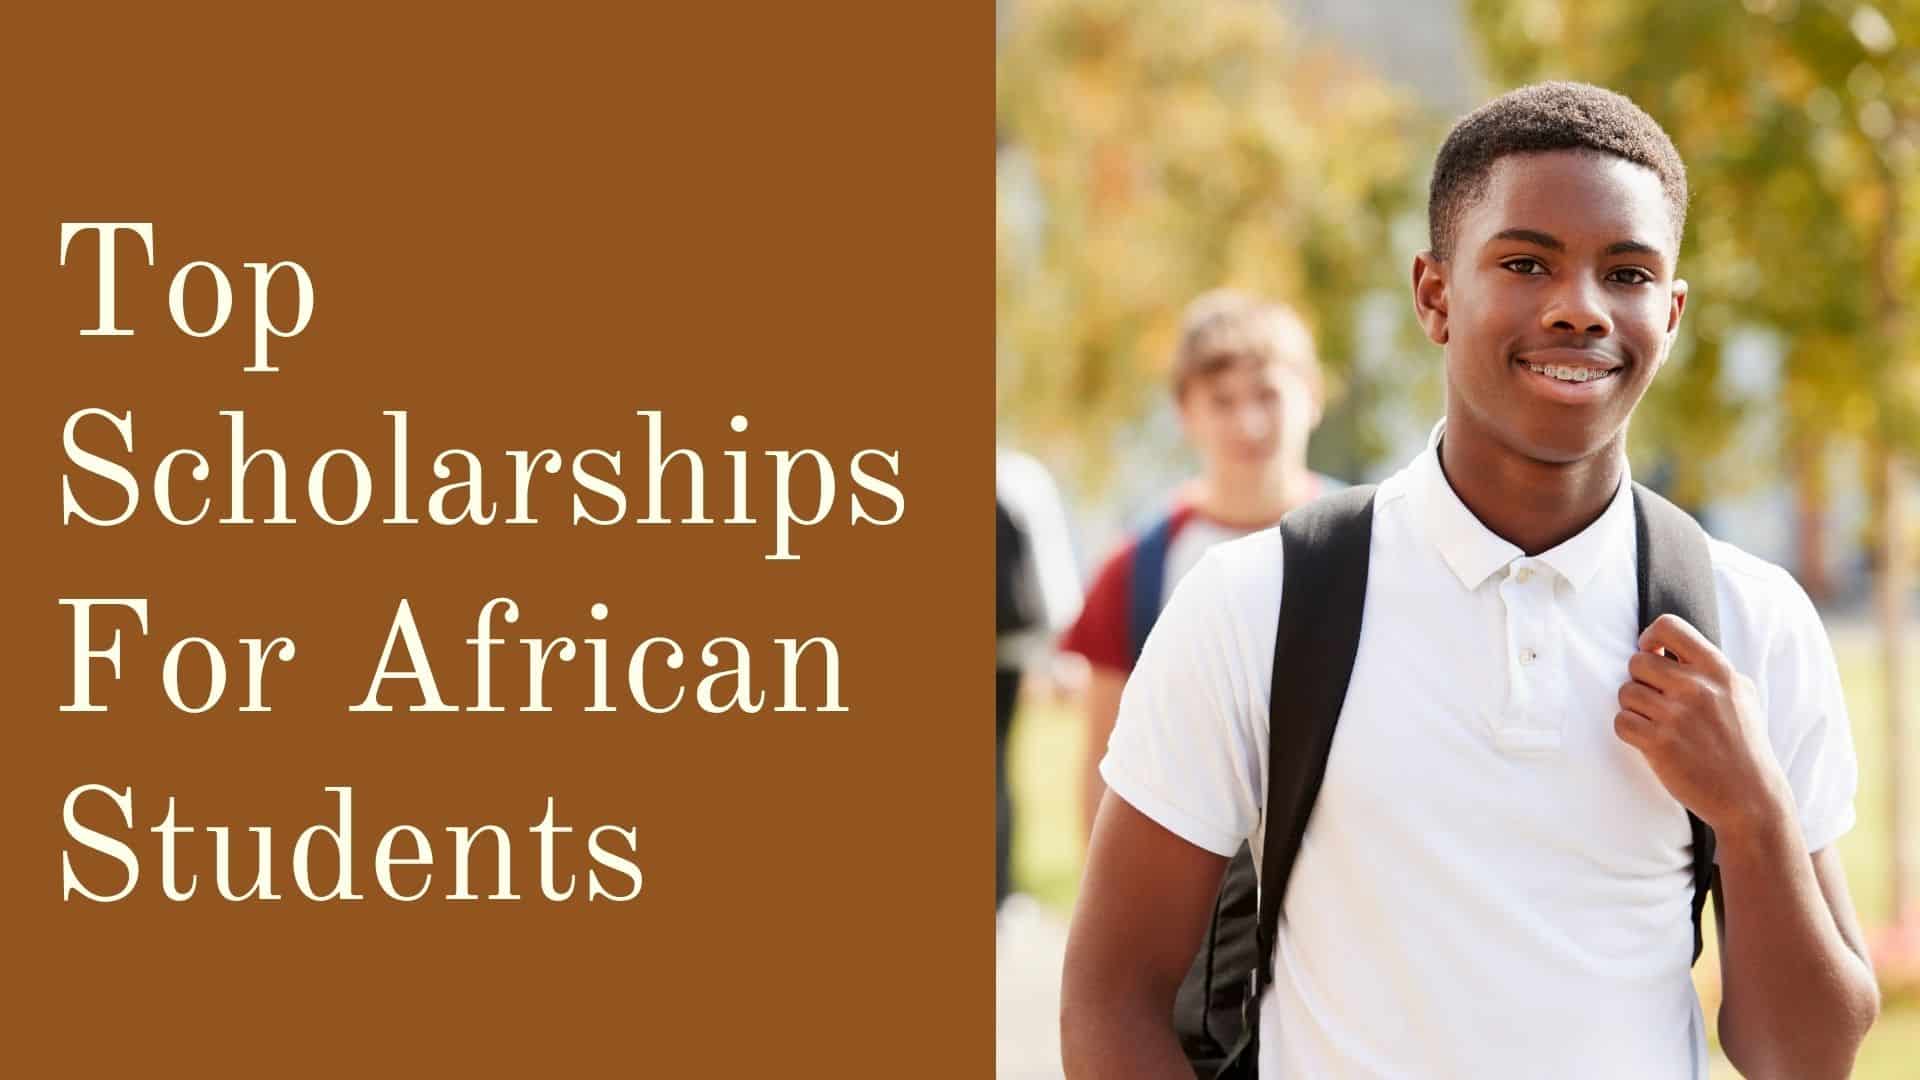 Top Scholarships For African Students